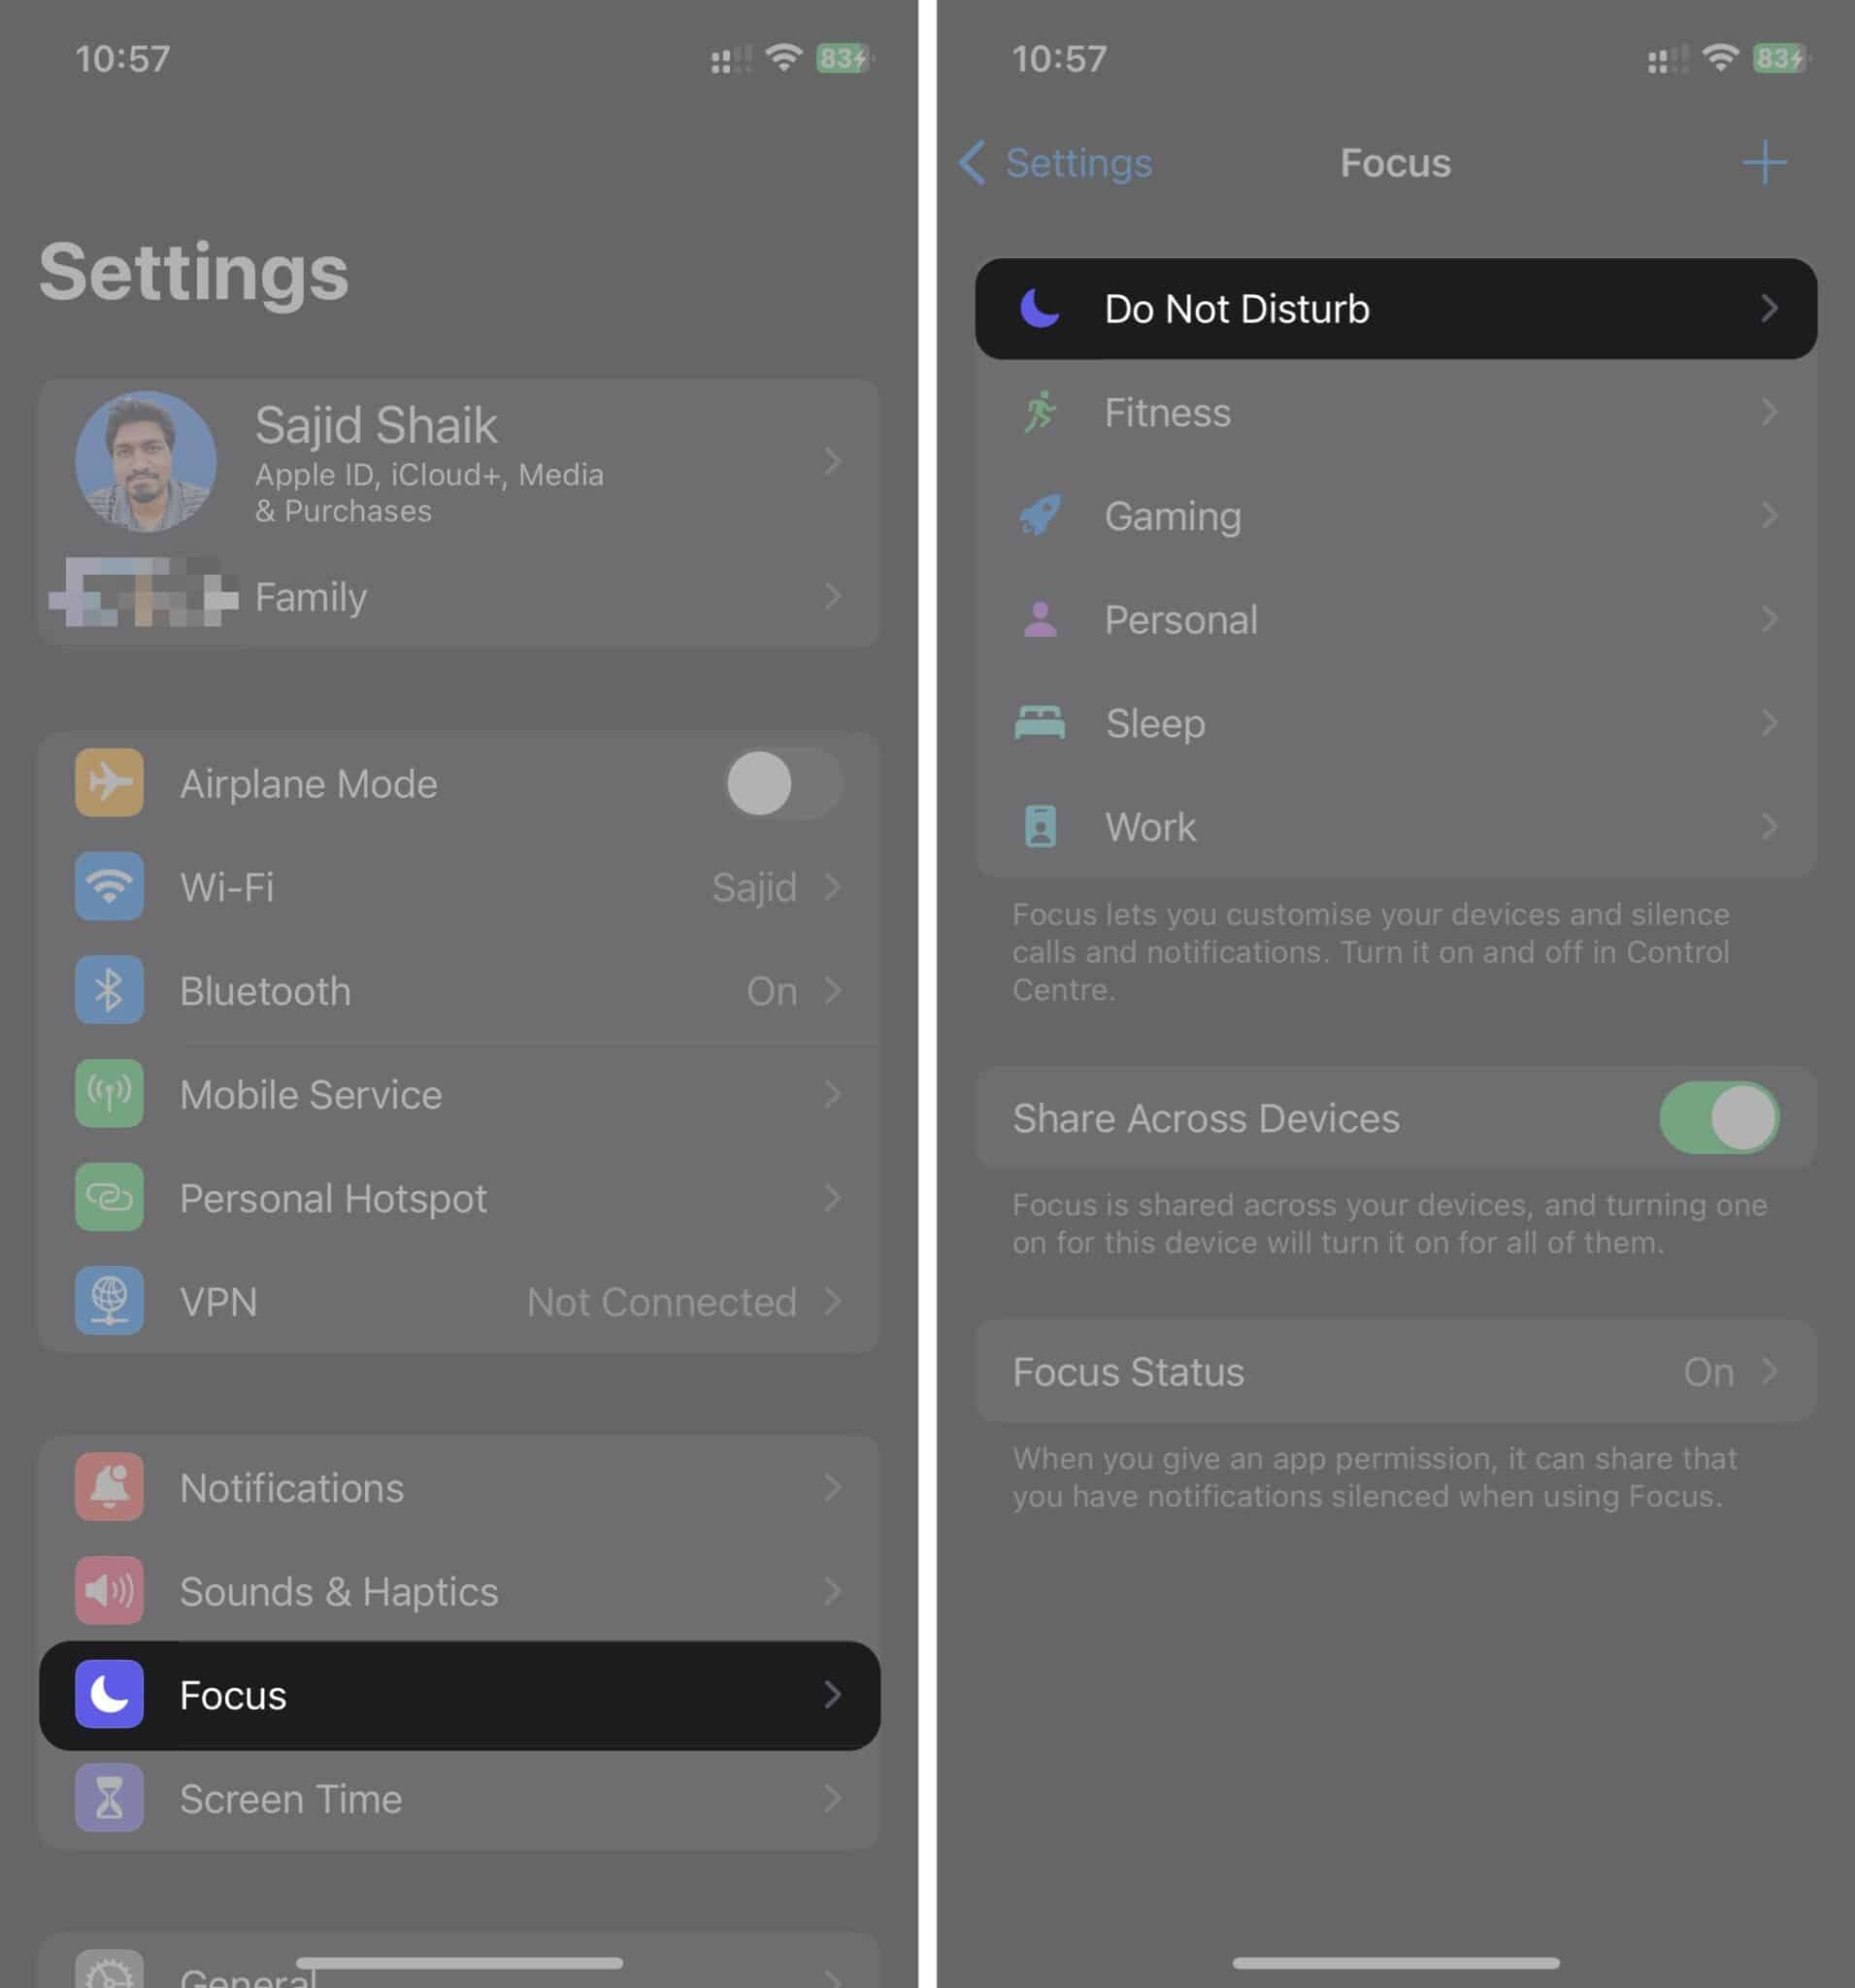 Do Not Disturb in Focus settings on iPhone